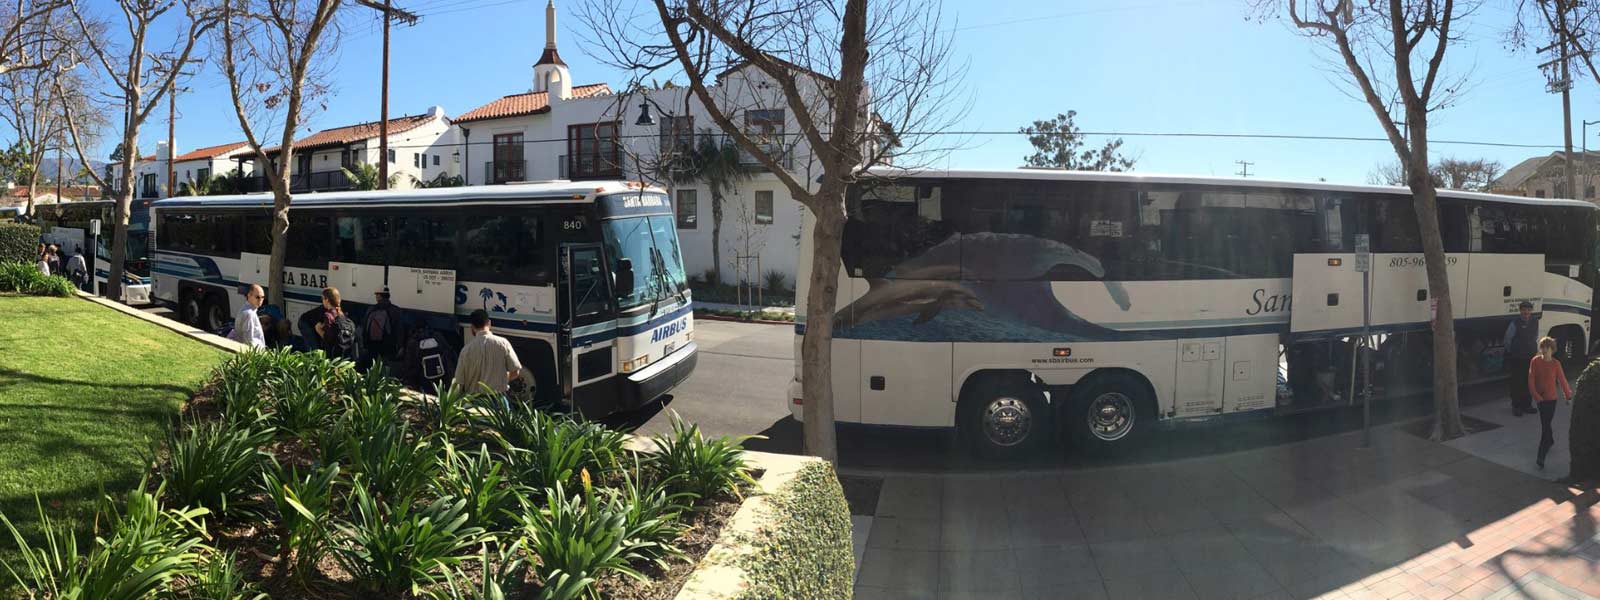 The Santa Barbara Airbus fleet of private tour coaches waiting for passengers to board.